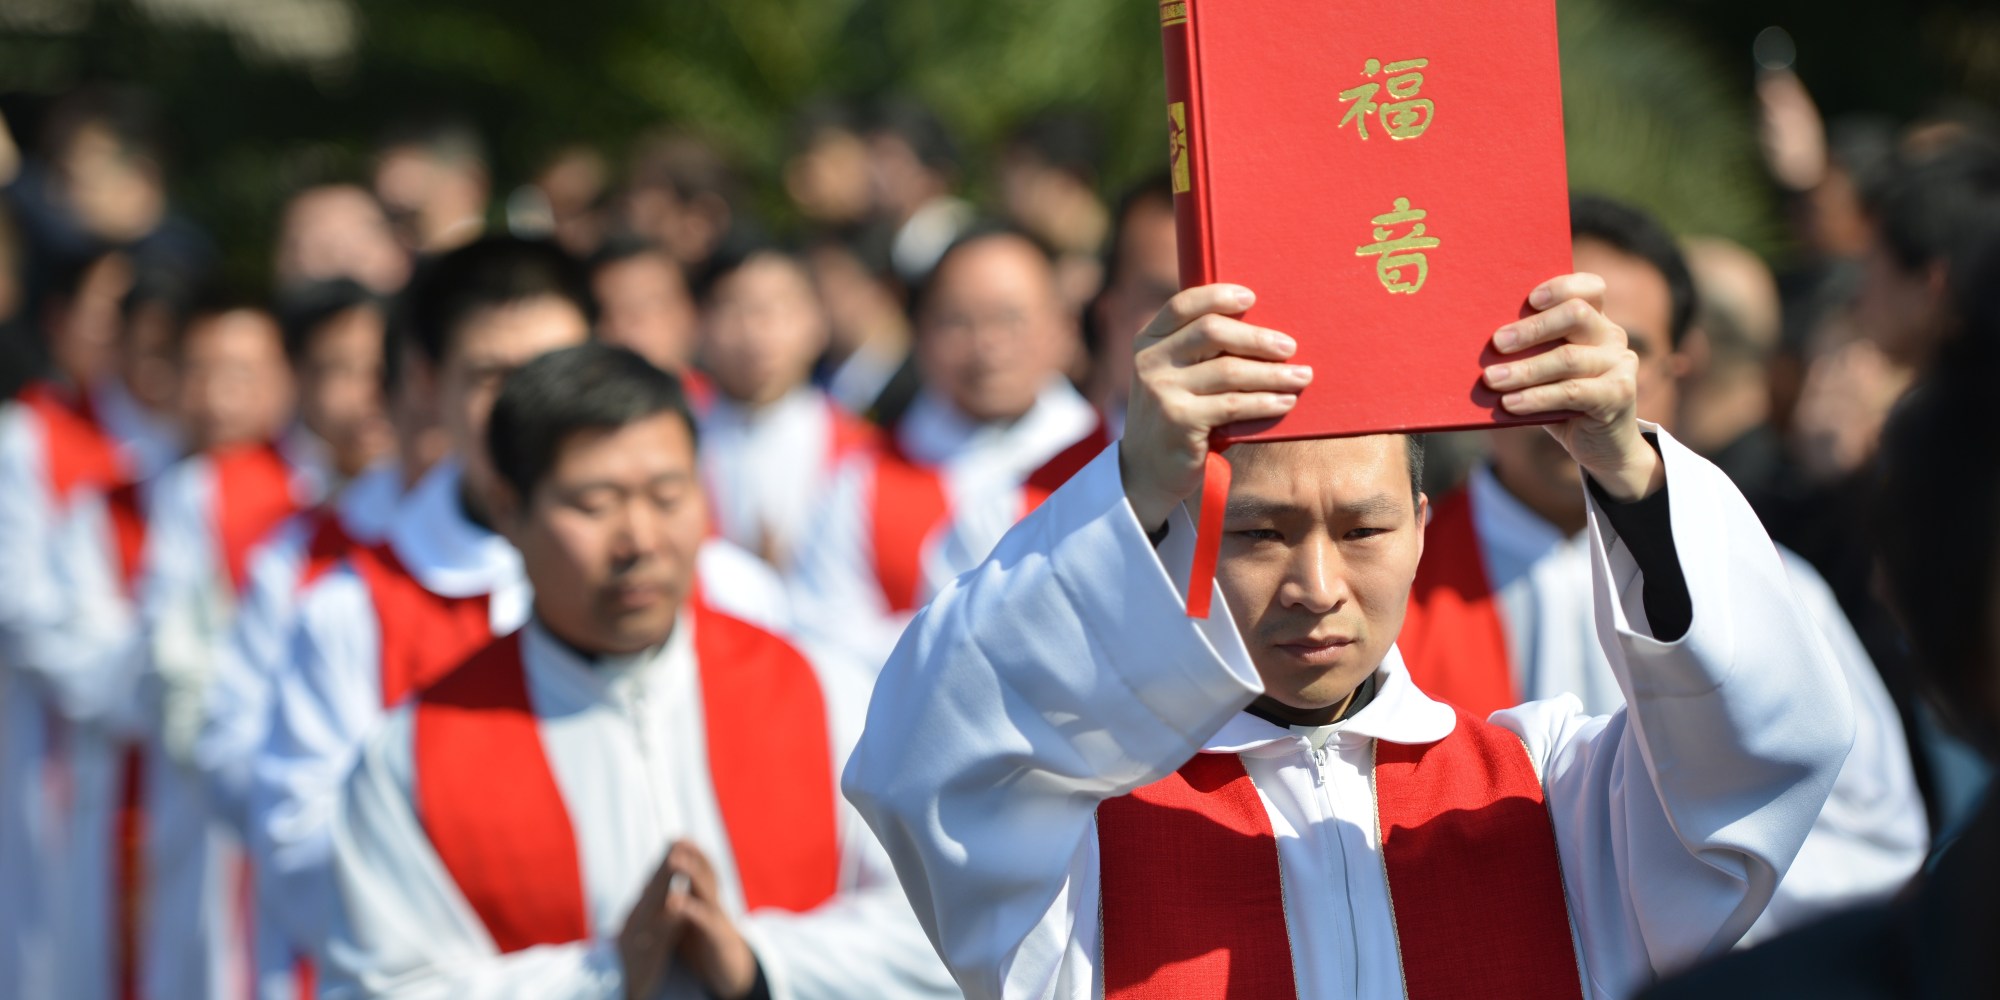 70 Million: The Approximate Number of Practicing Christians in China Today